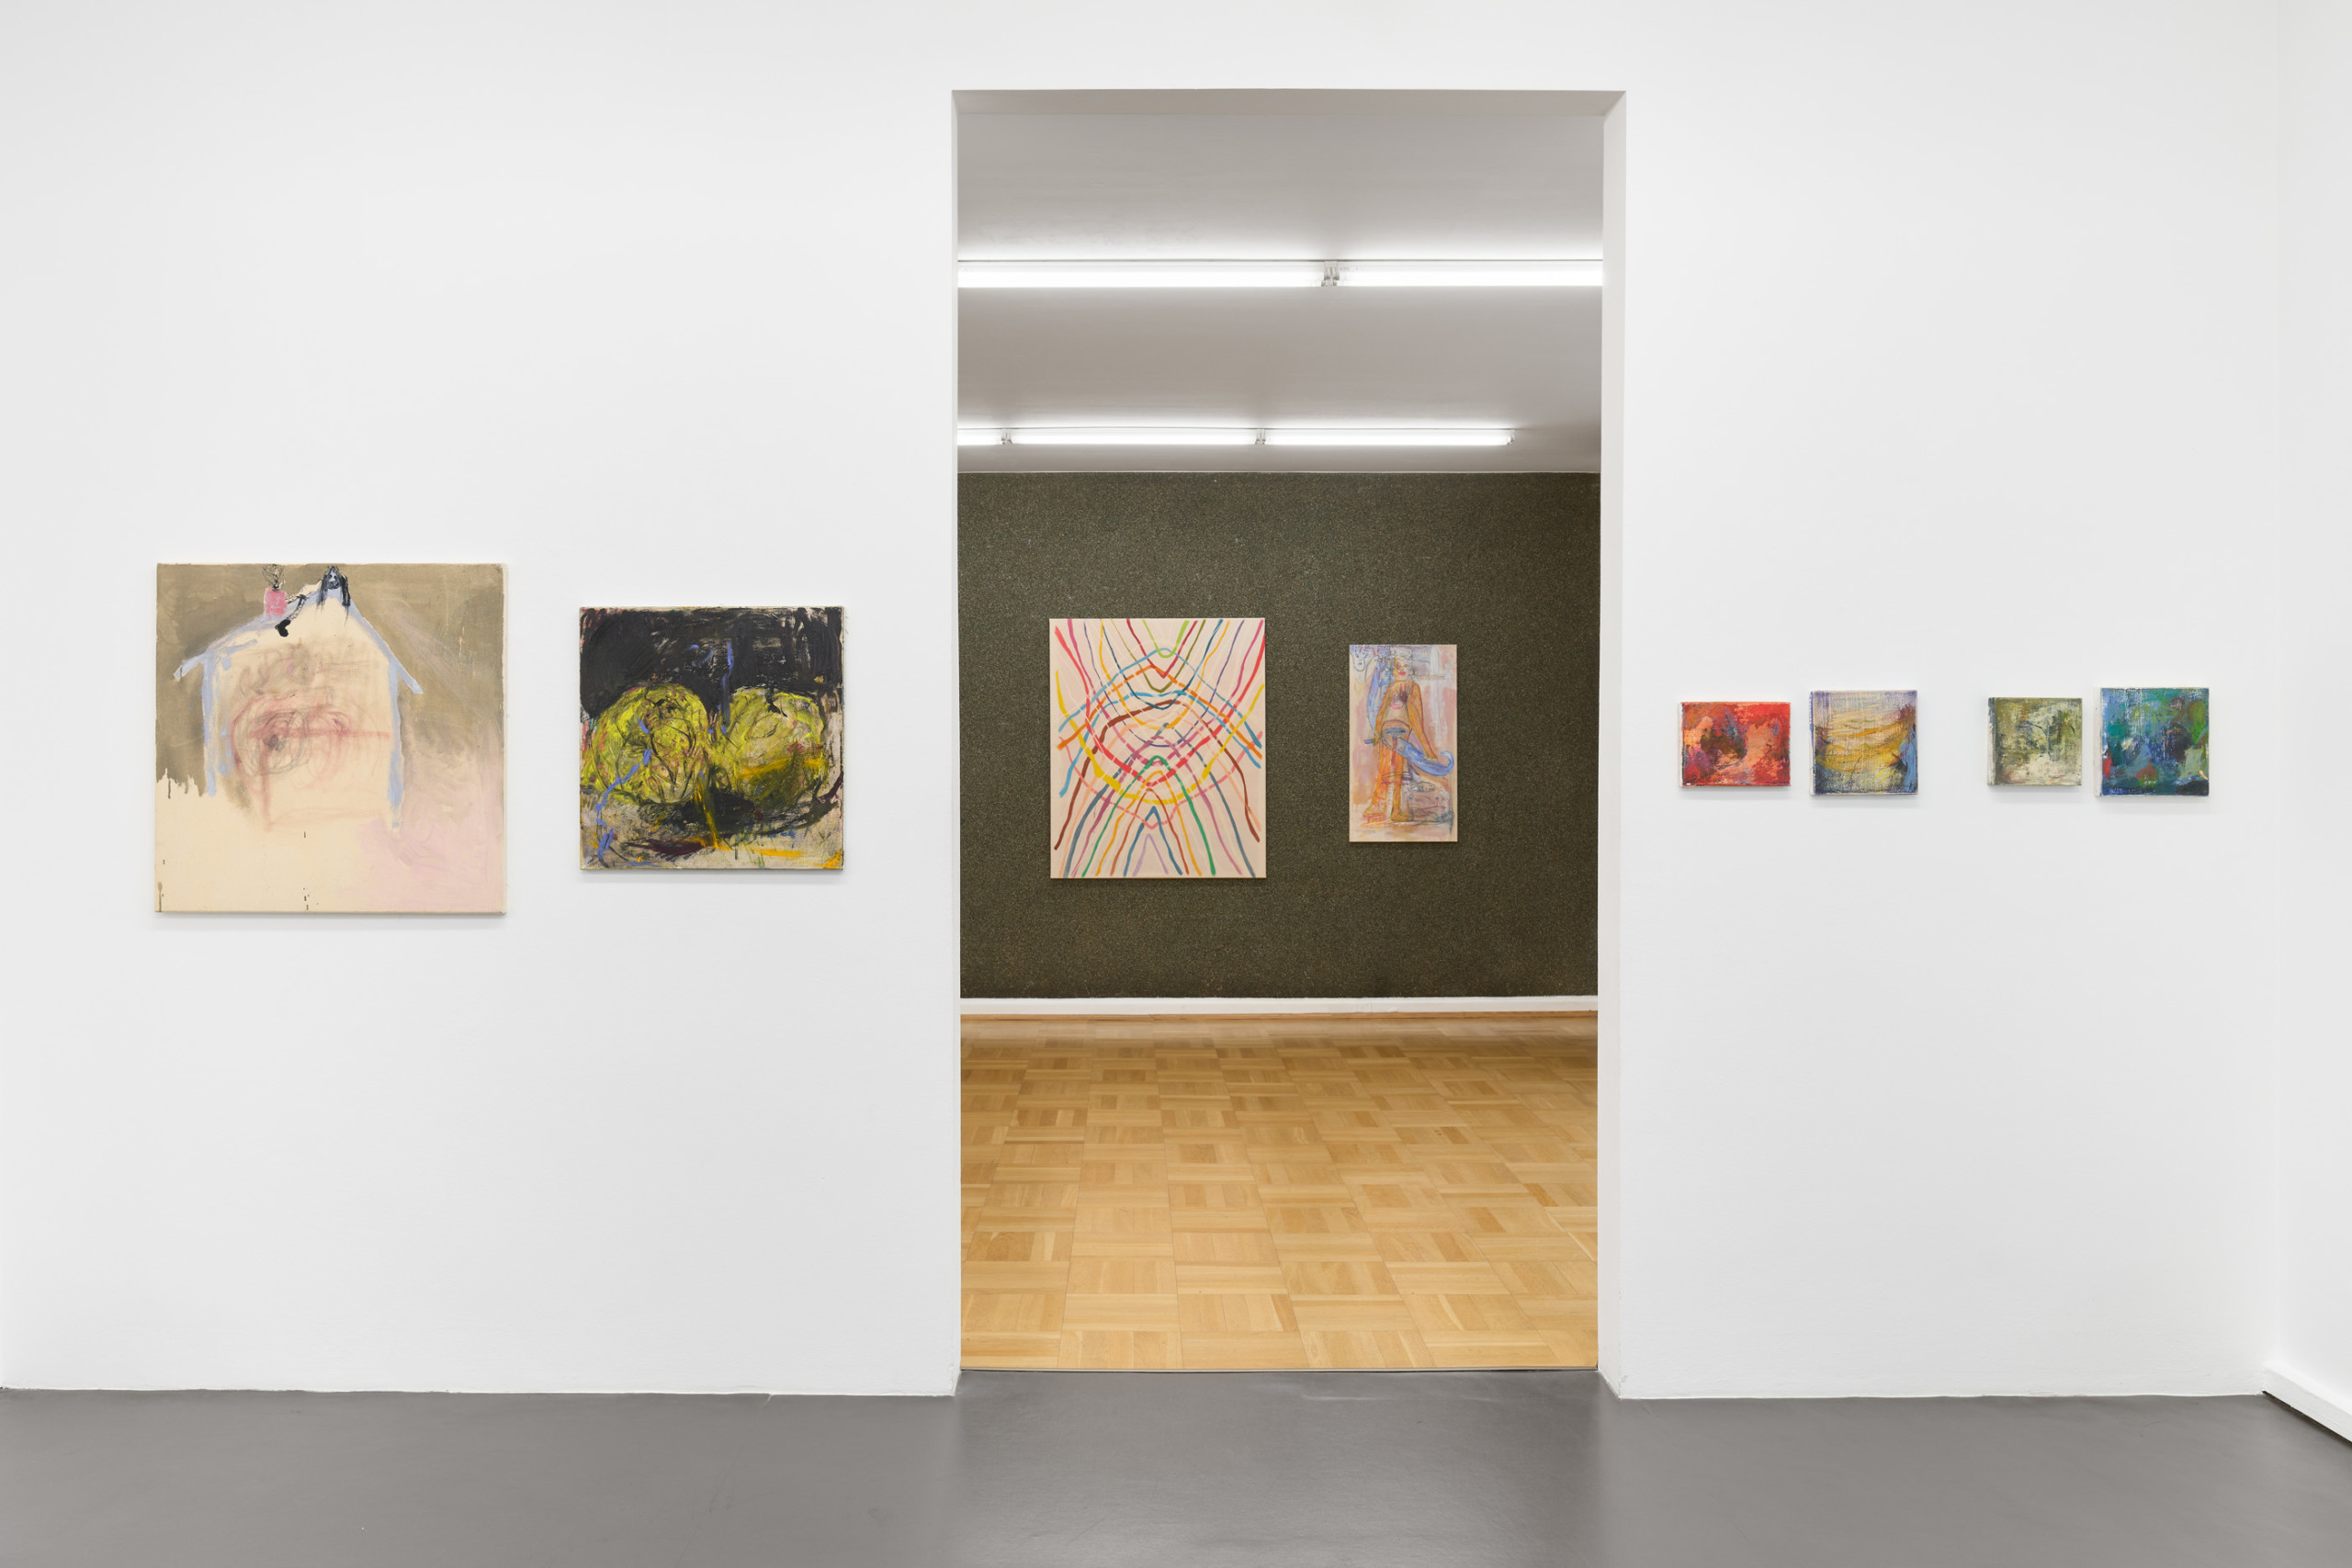 An image of a gallery space: six paintings are hung on the wall in the front. In the middle of the wall is a doorway leading to another room. Two paintings are hung on a wall in the back room.